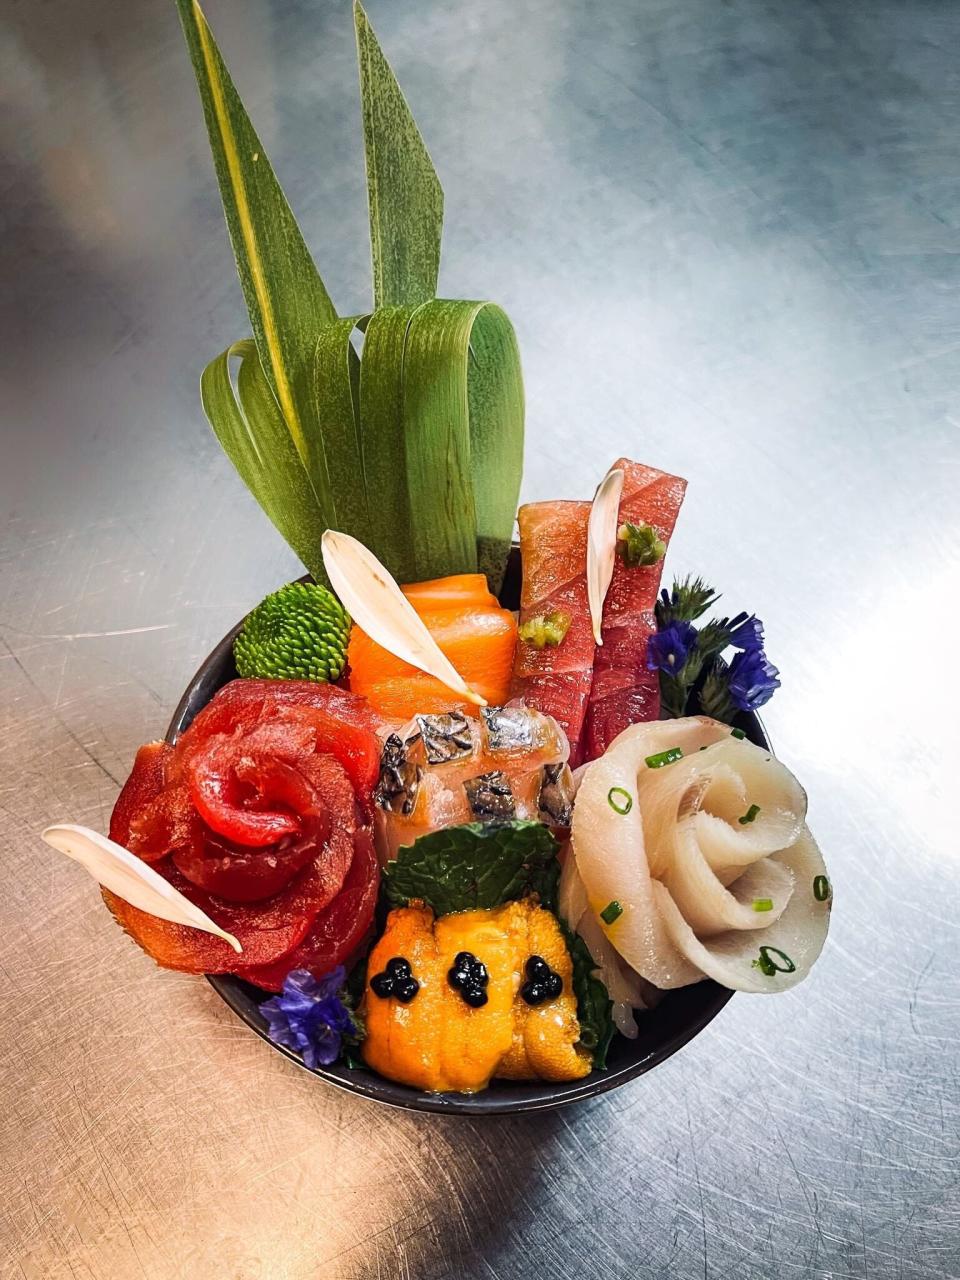 Sushi by Boū in Boca Raton will offer a romantic sashimi bouquet for $29.